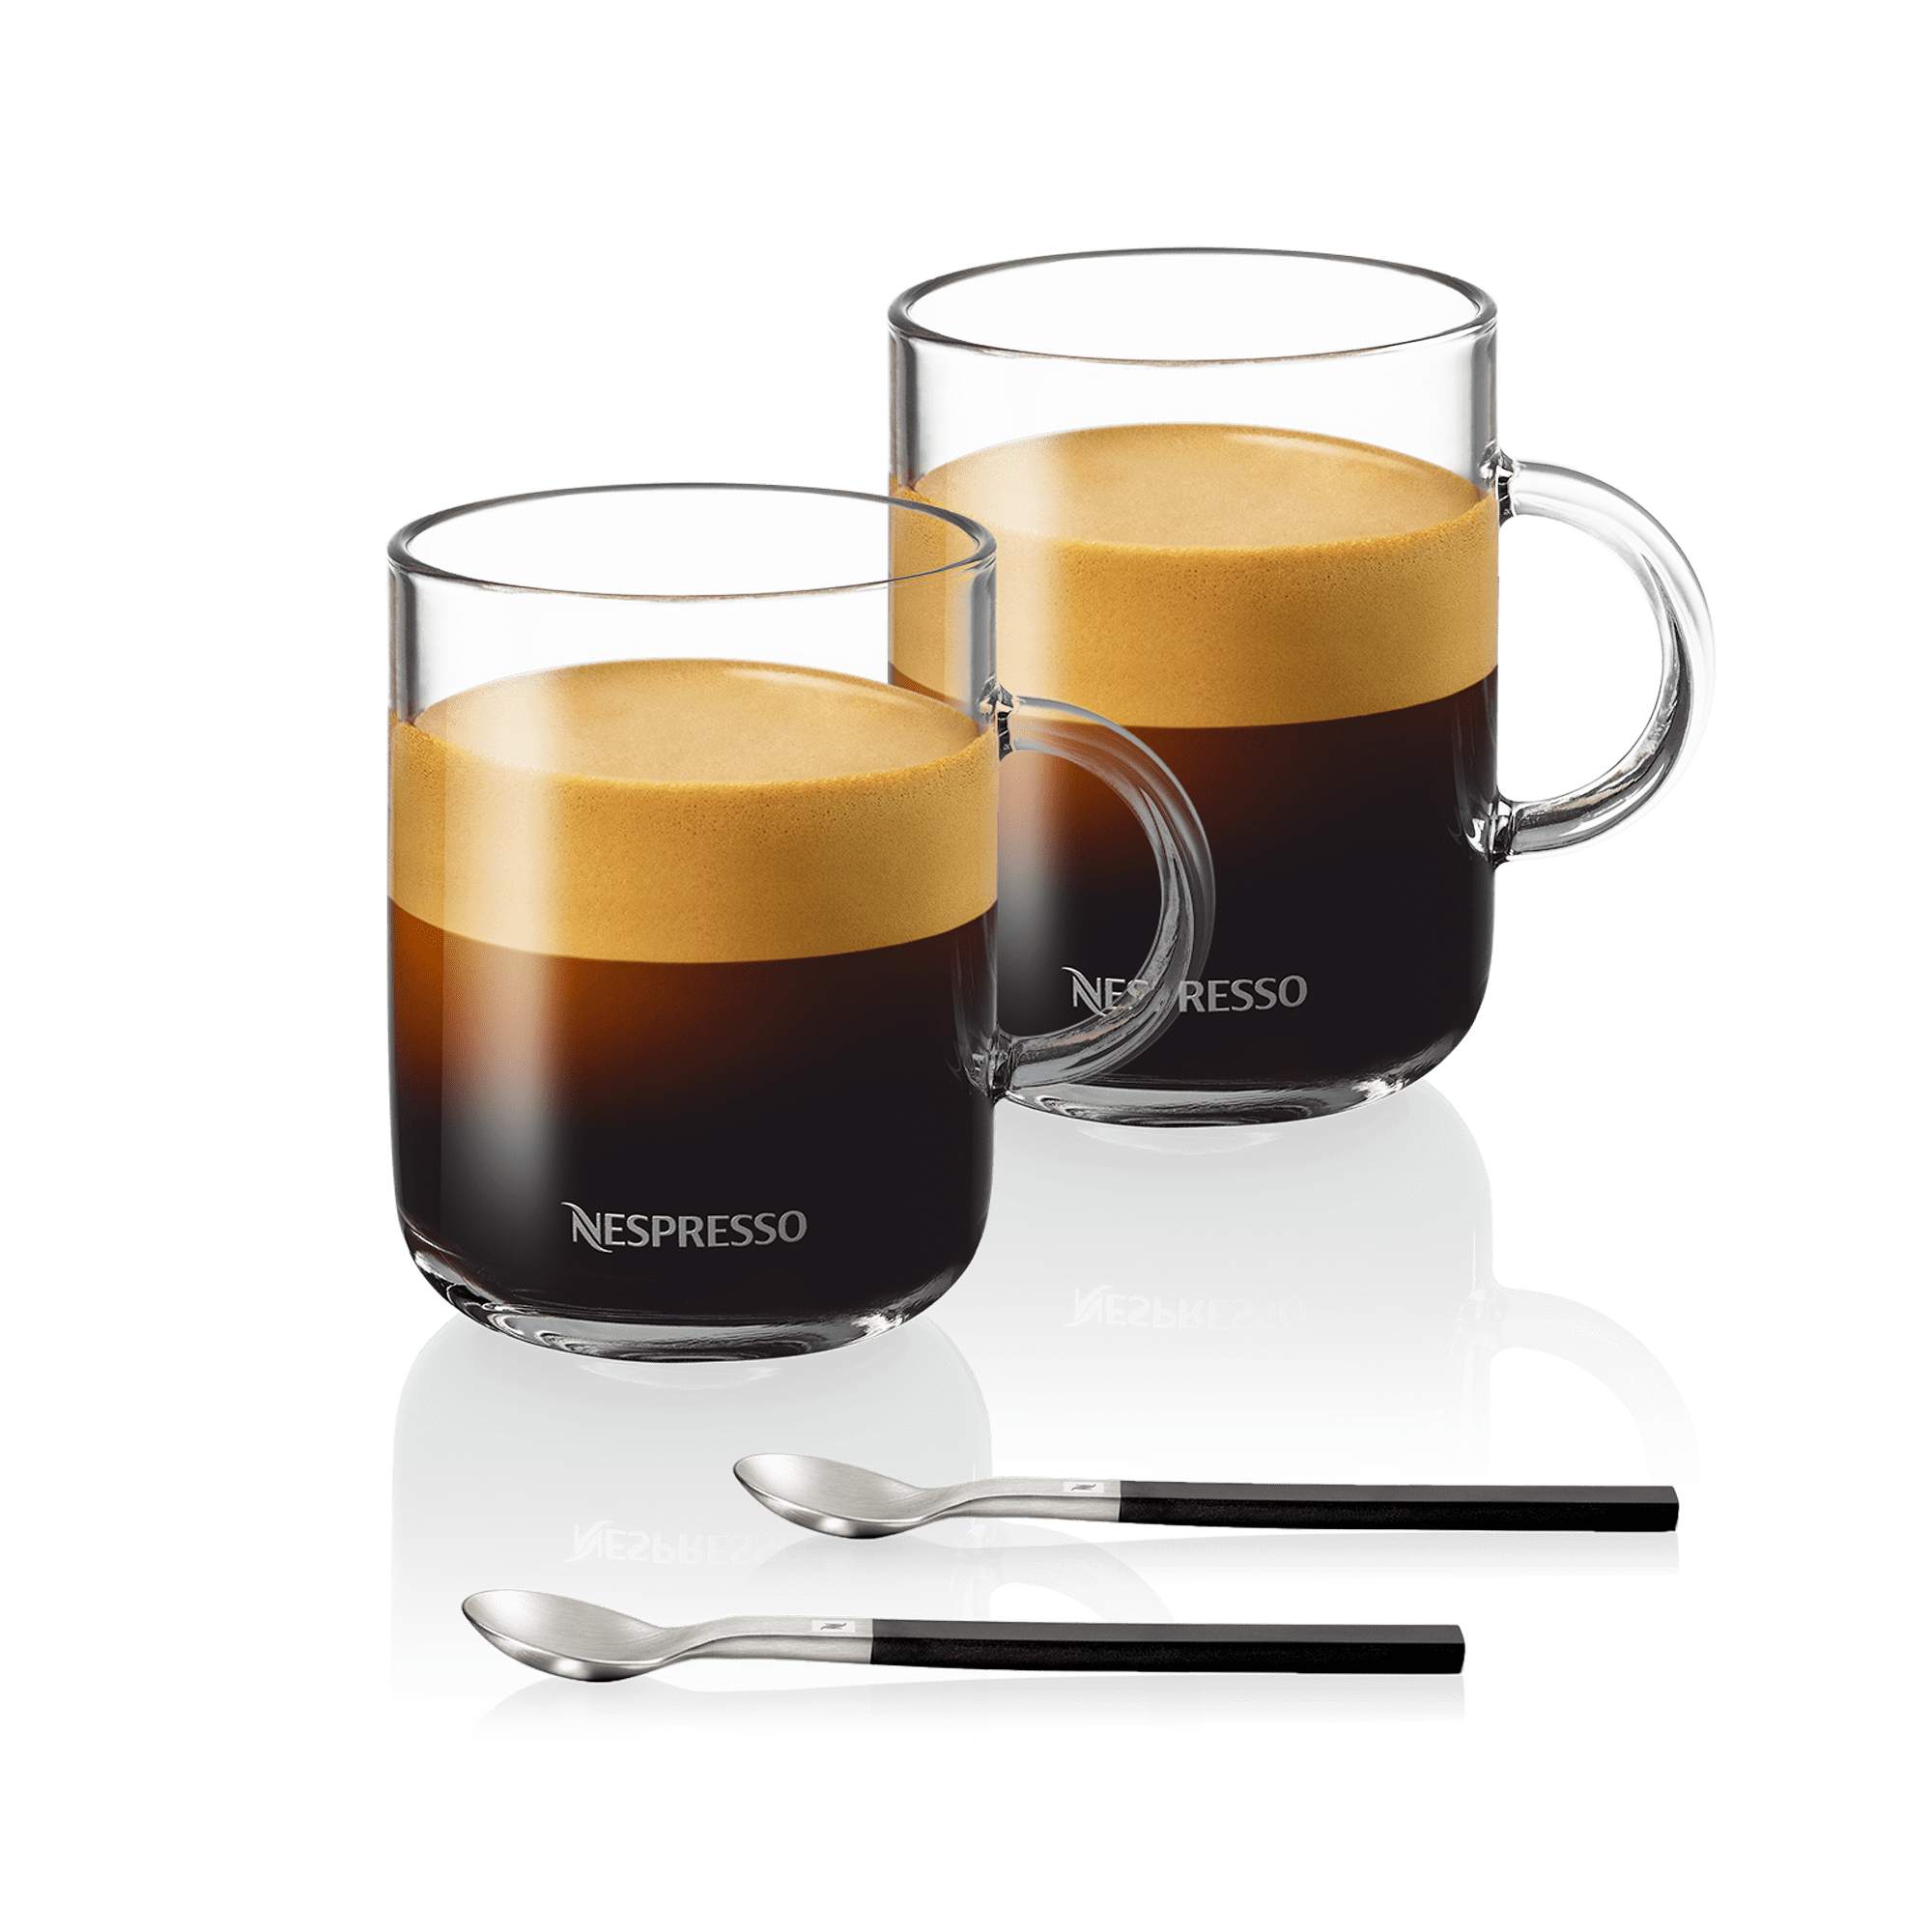 New Nespresso Vertuo Coffee Mugs Cups Set Of 2 with Il Caffè Sleeve and Coasters